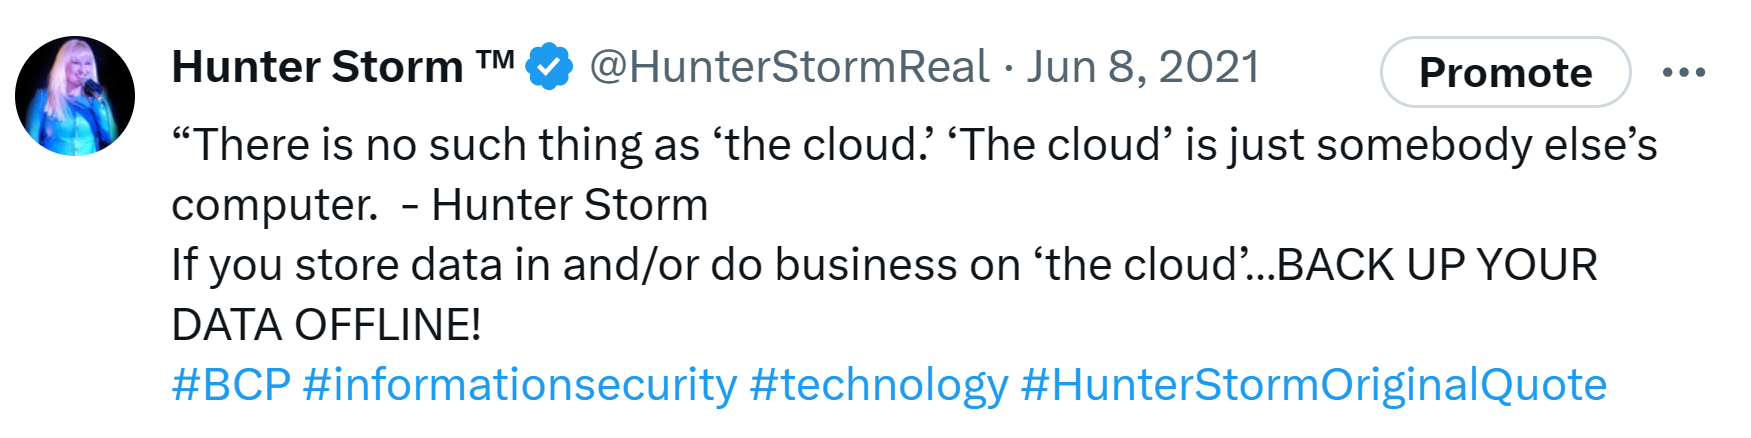 Hunter Storm Wisdom: Timeless Insights and Inspiration | “There is no such thing as ‘the cloud.’ ‘The cloud’ is just somebody else’s computer." In addition to this direct quote of a phrase Hunter coined, she advises, "If you store data in and/or do business on ‘the cloud’…back up your data offline!"